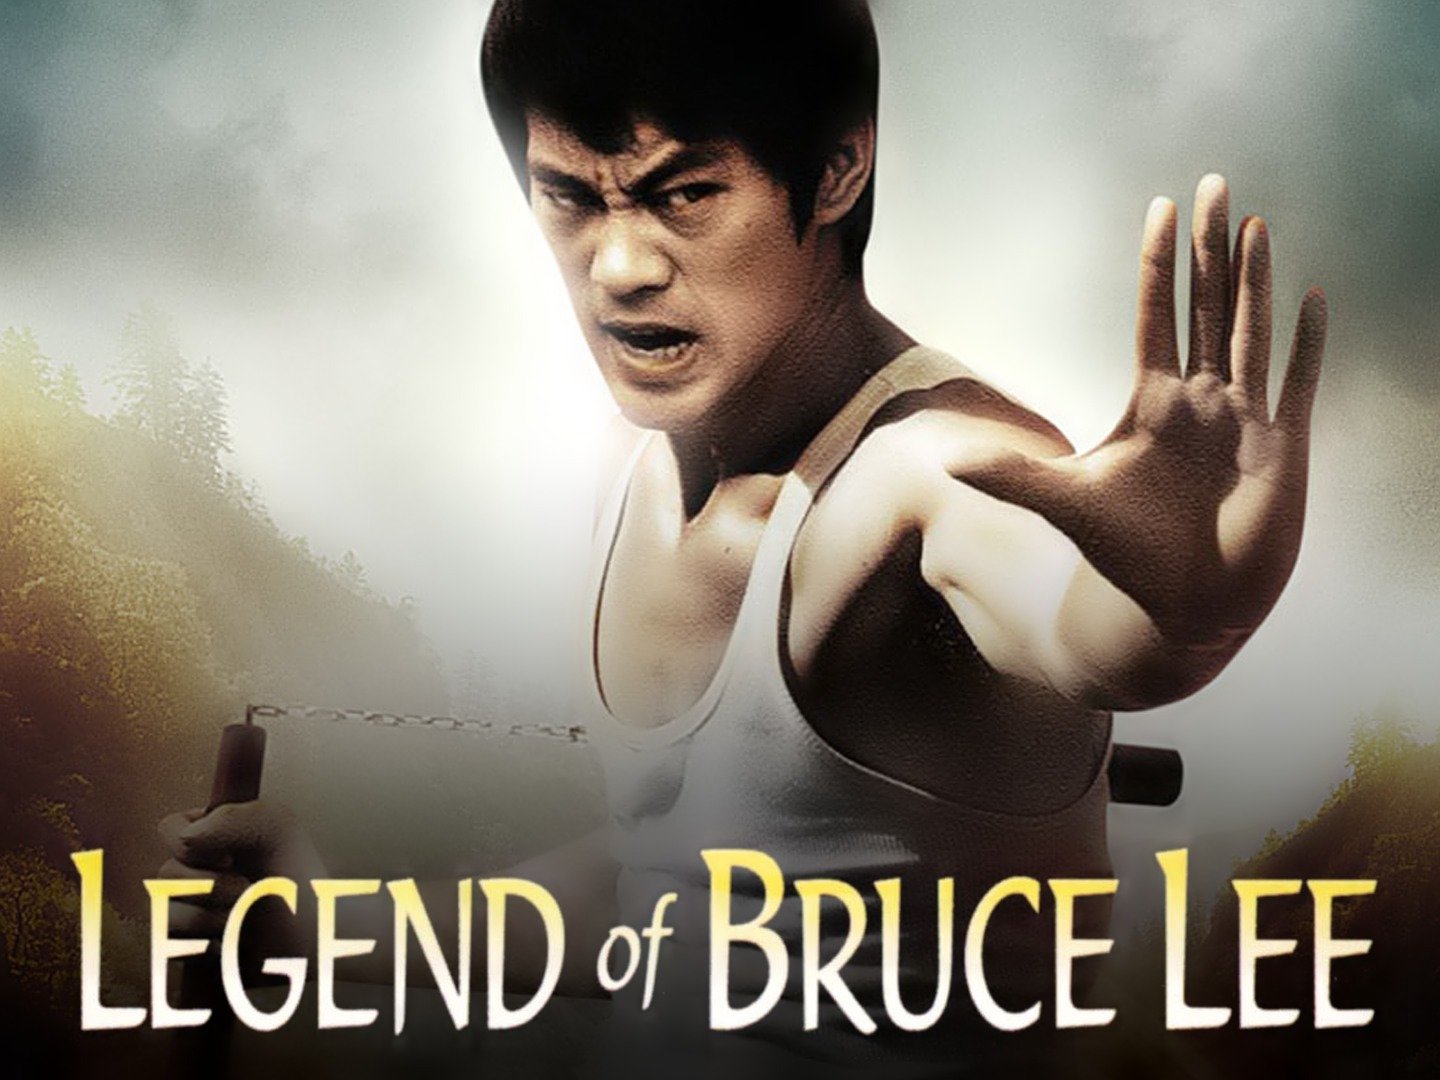 The Legend of Bruce Lee Movie Reviews